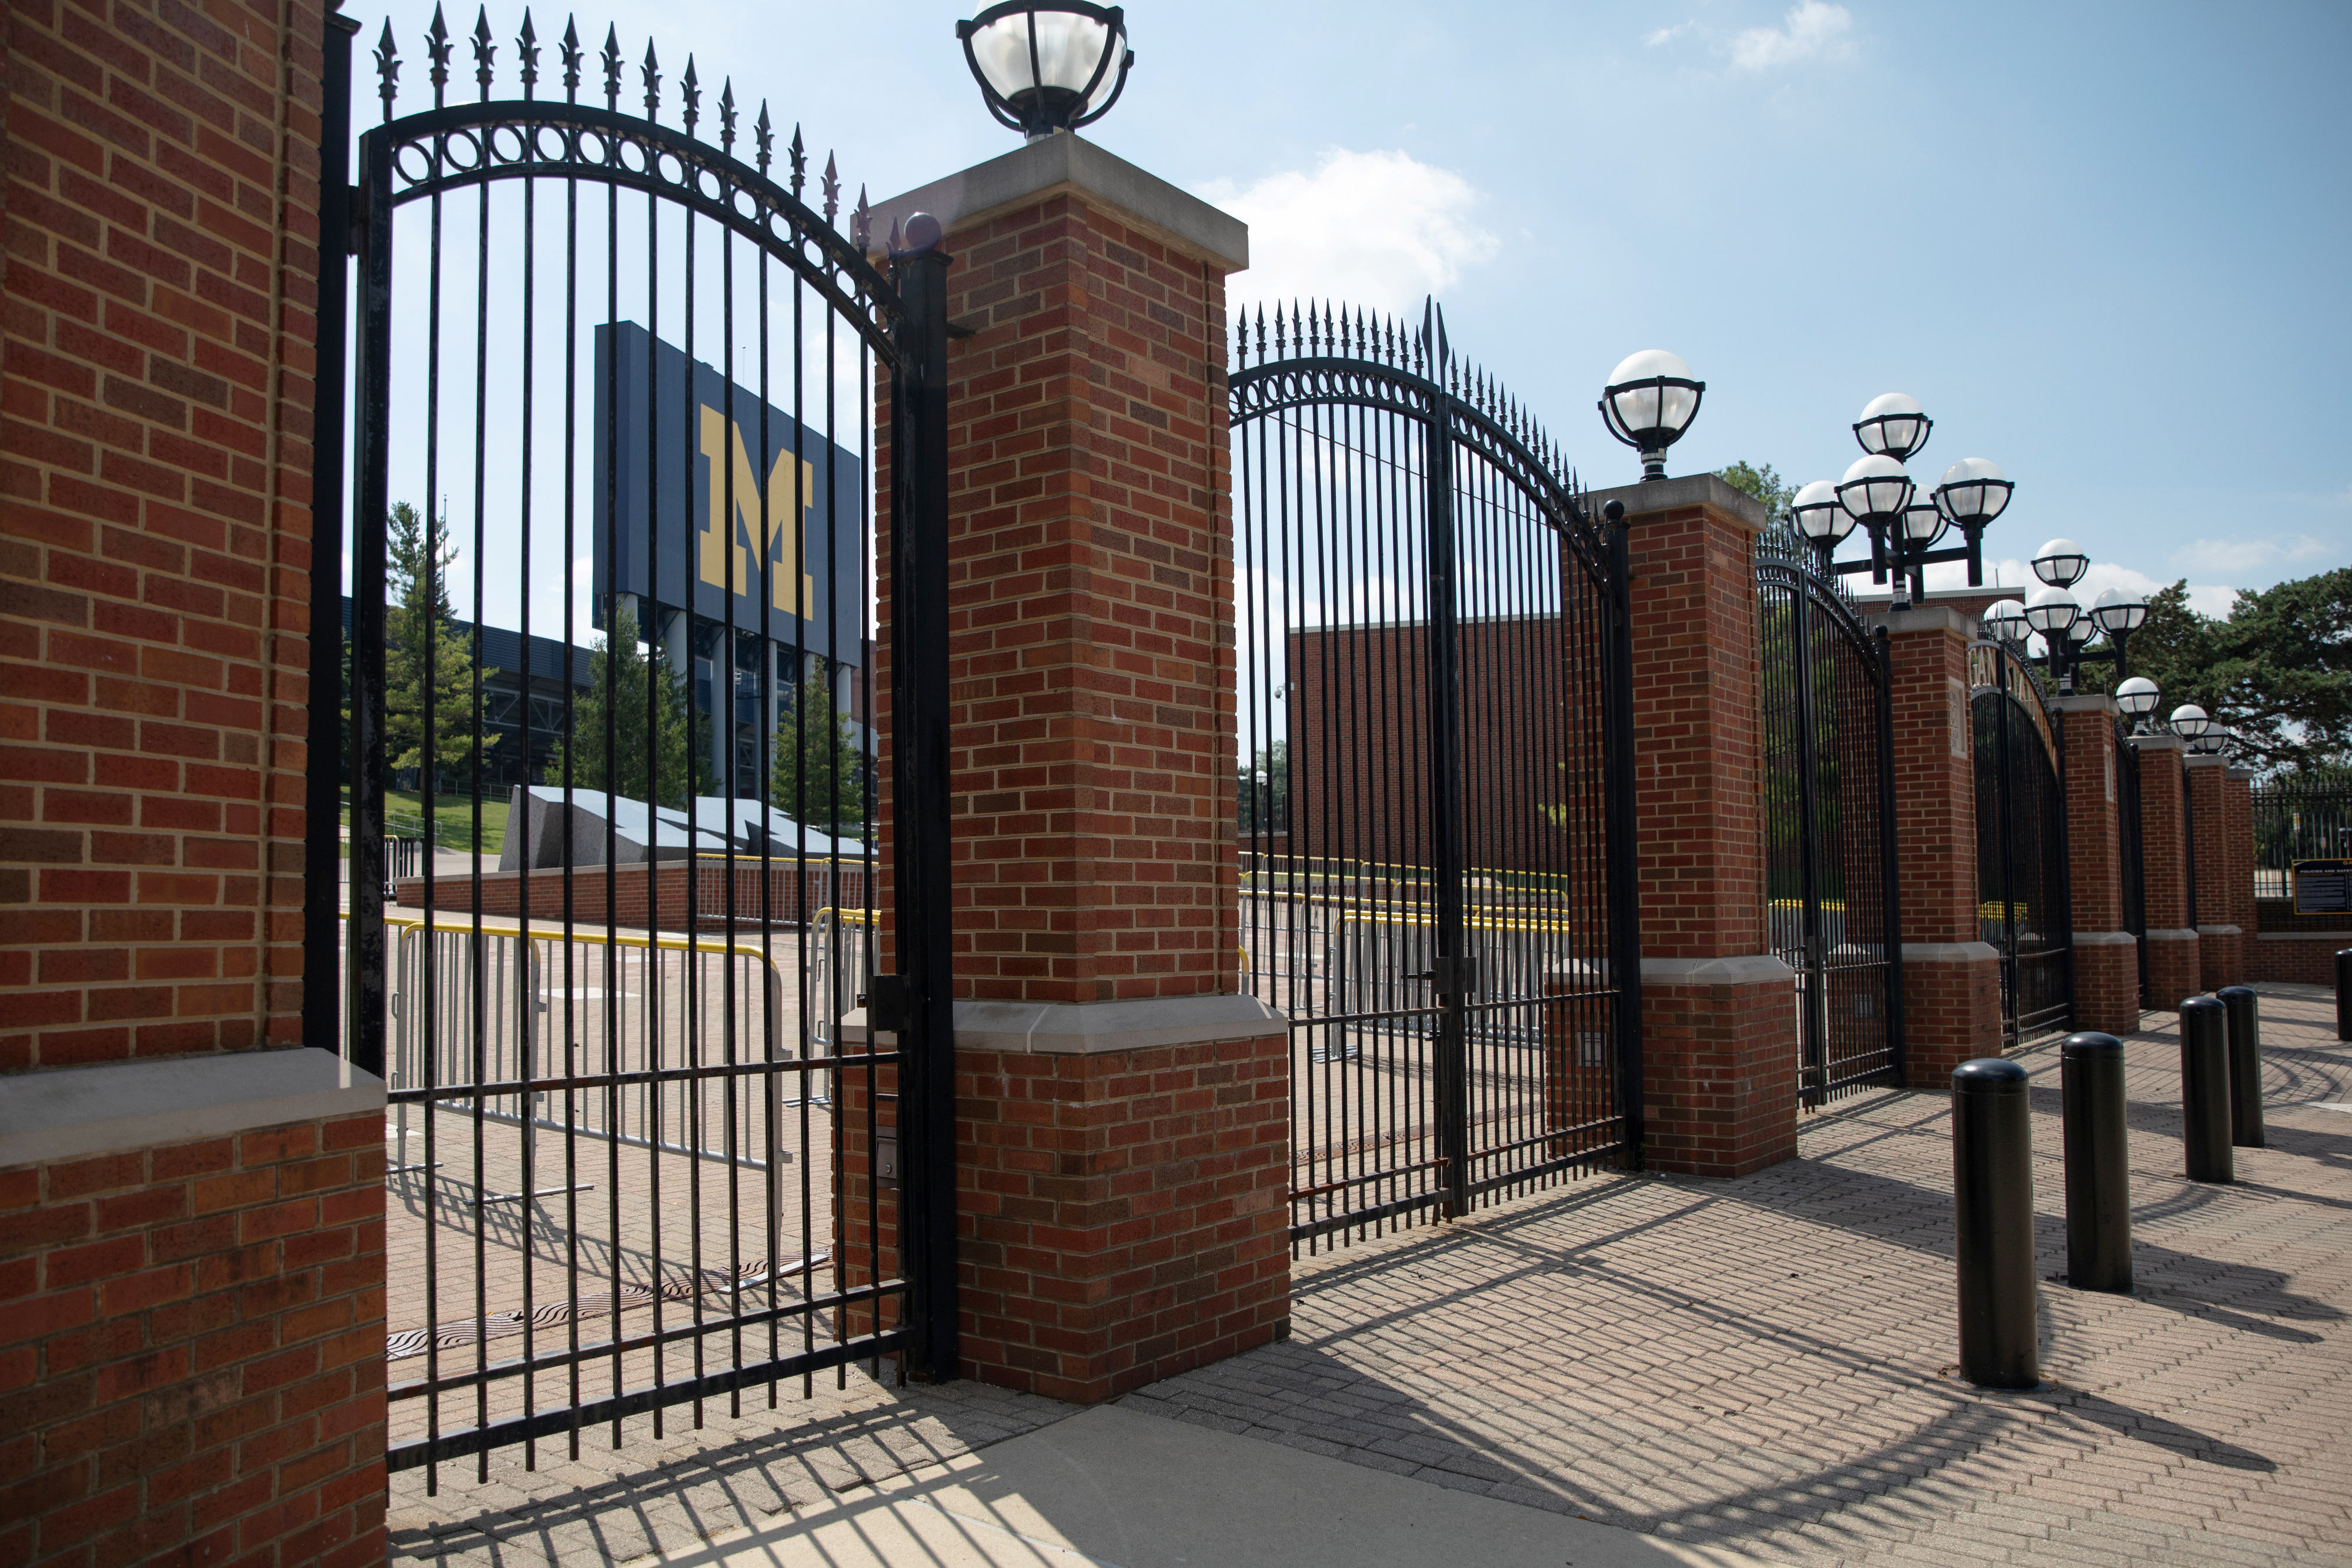 The entrance to Michigan Stadium on the University of Michigan campus is seen in Ann Arbor